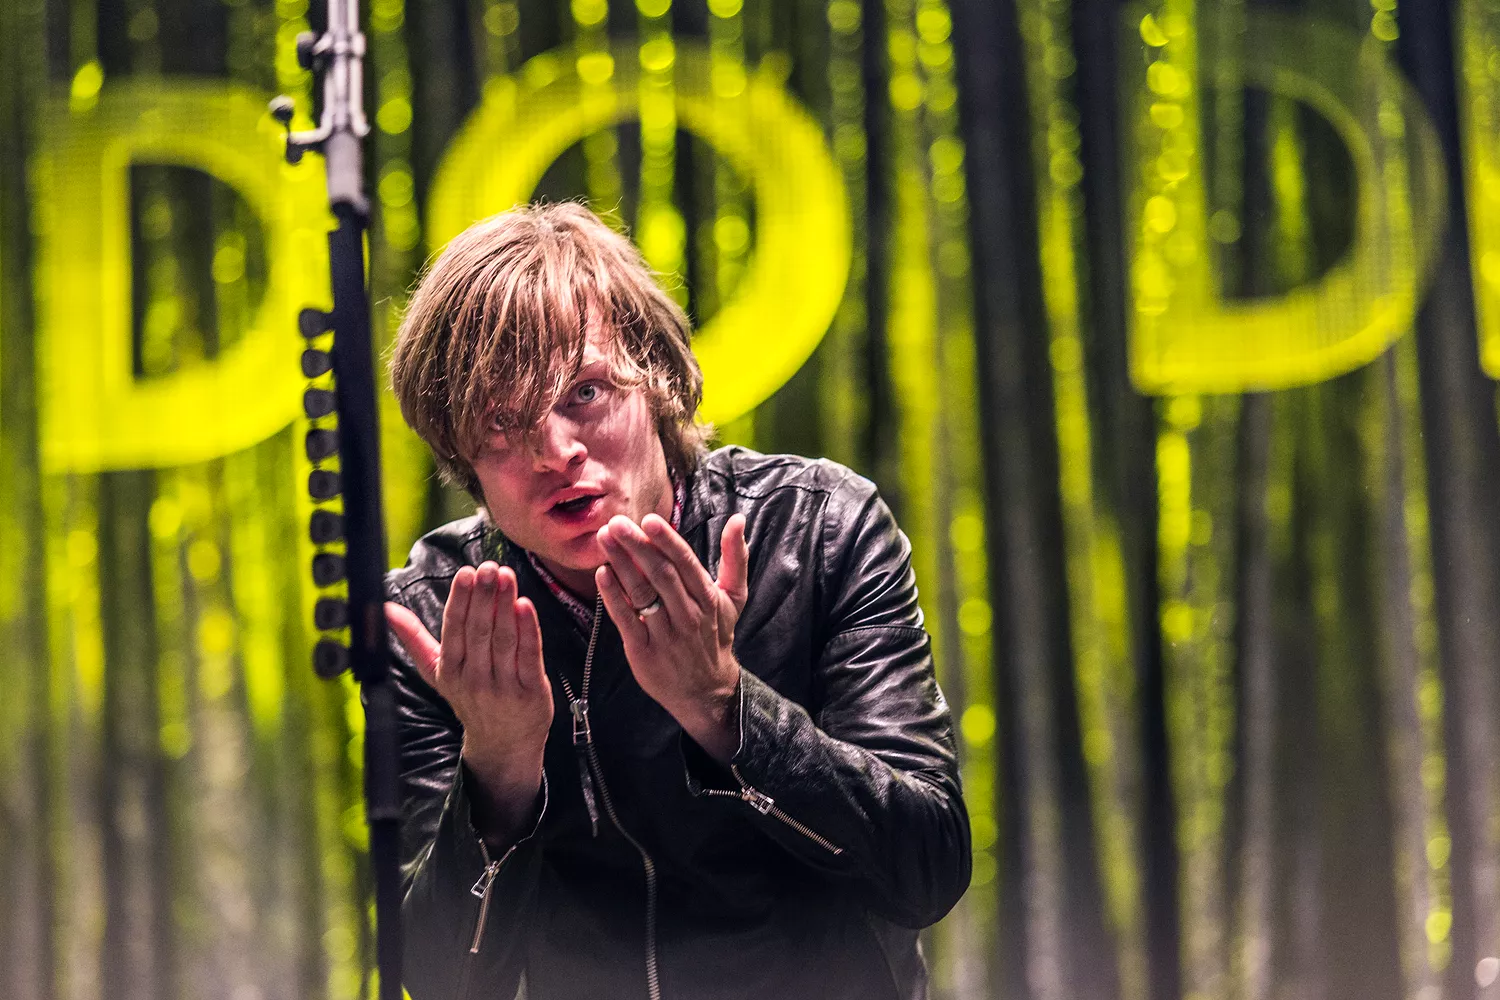 Northside Festival, Red Stage - Mando Diao